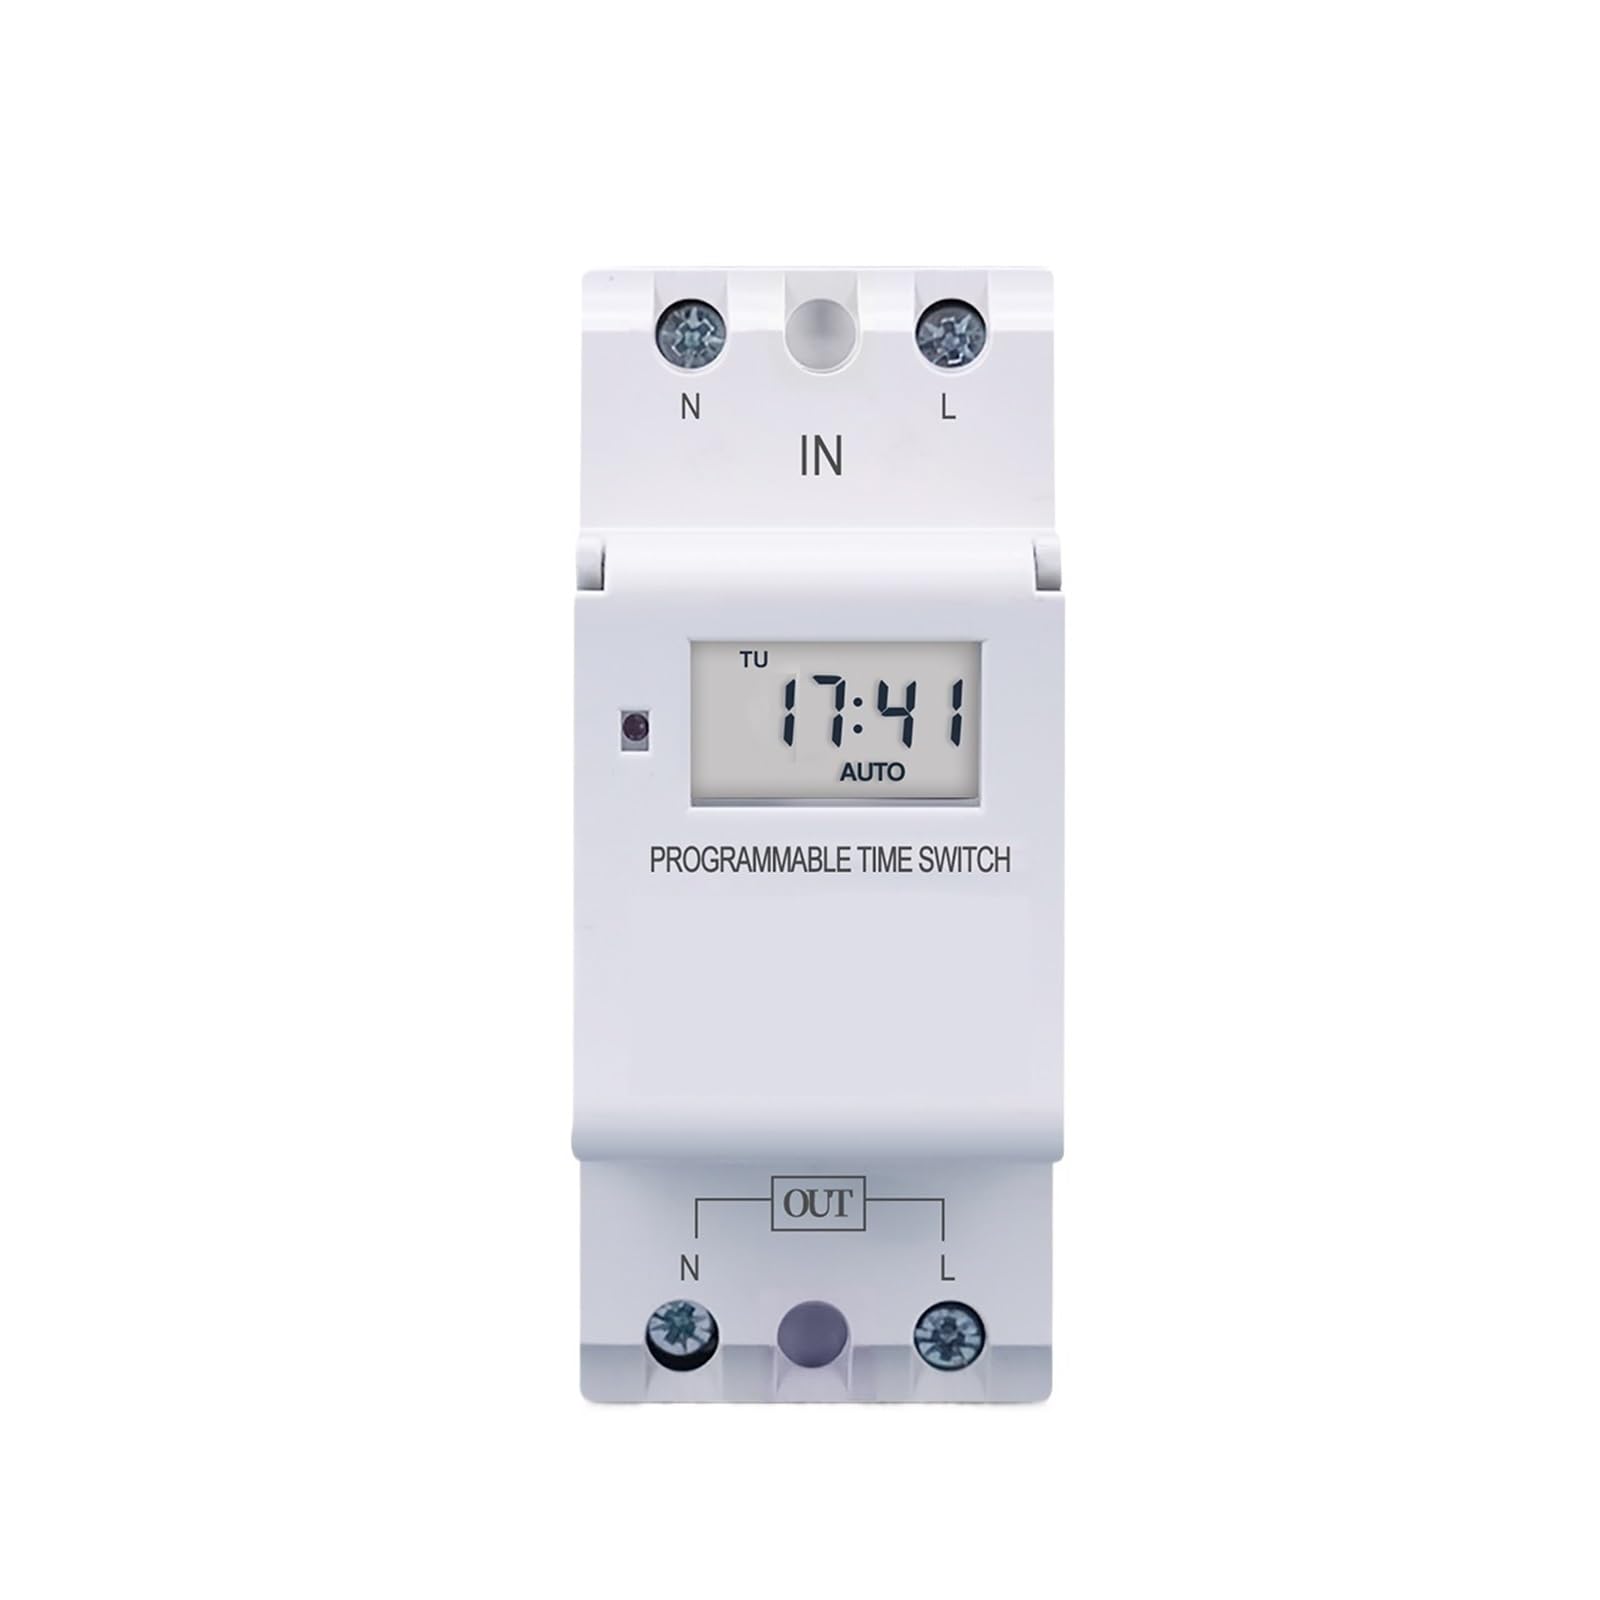 Ersatzteile New type Din Rail 2 wire Weekly 7 Days Programmable Digital TIME SWITCH Relay Timer Control AC 220V 230V 12V 24V 48V 16A(15A,110V AC DC) von OTRYVBEHY